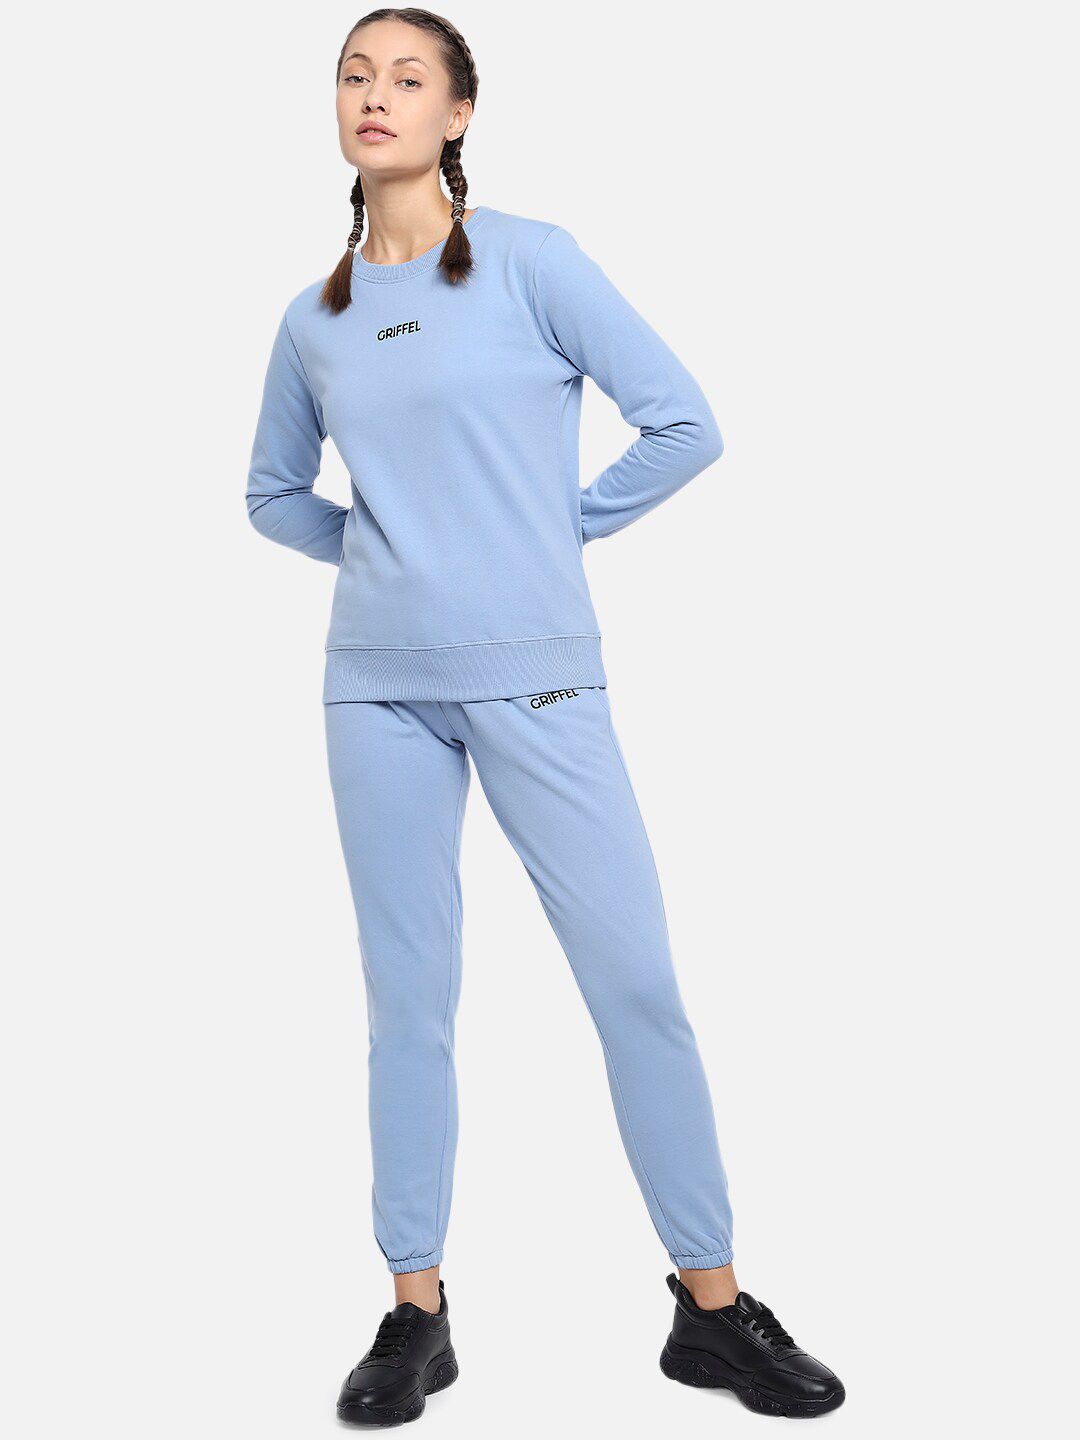 GRIFFEL Women Blue Solid Tracksuits Price in India